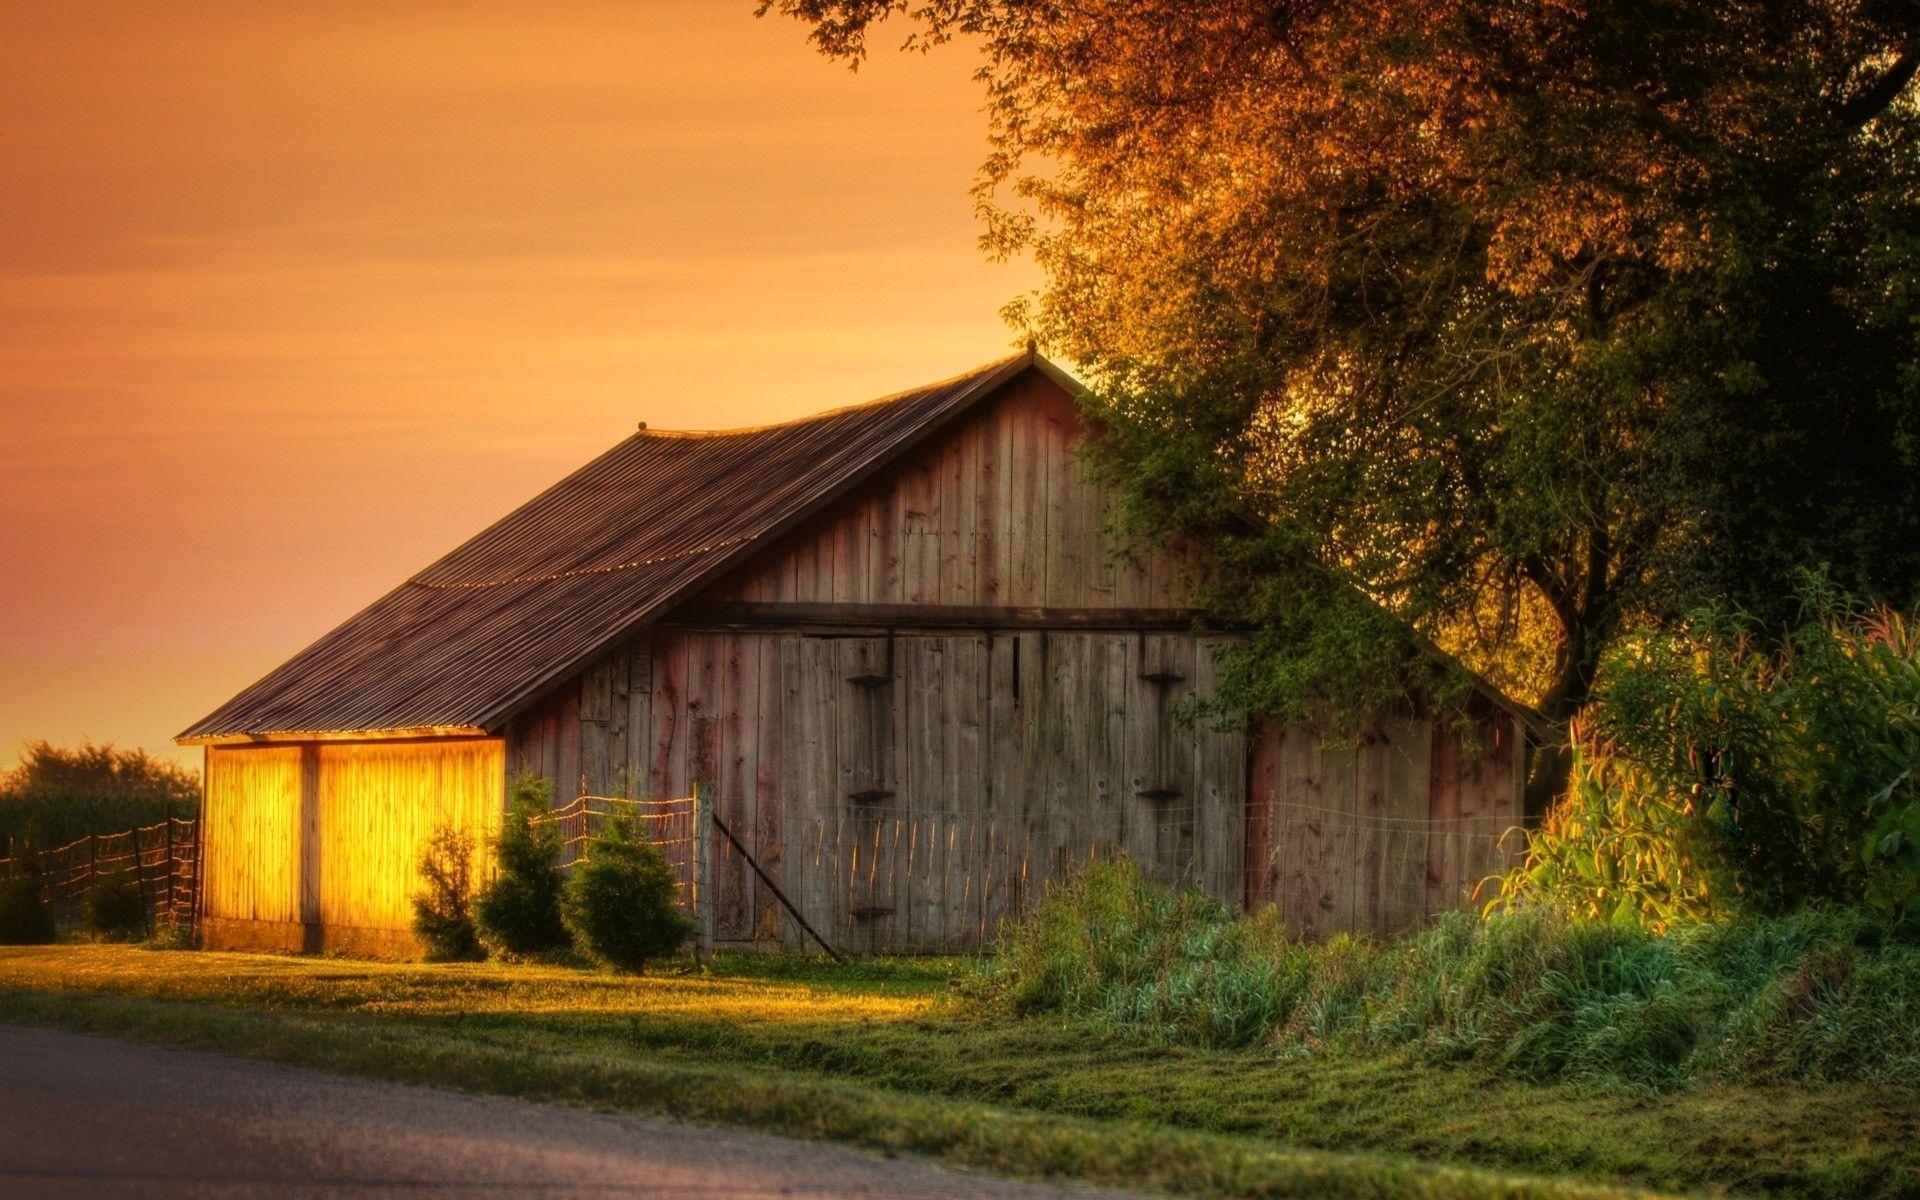 Barn Wallpaper. Free Pics Download For Android, Desktop. High